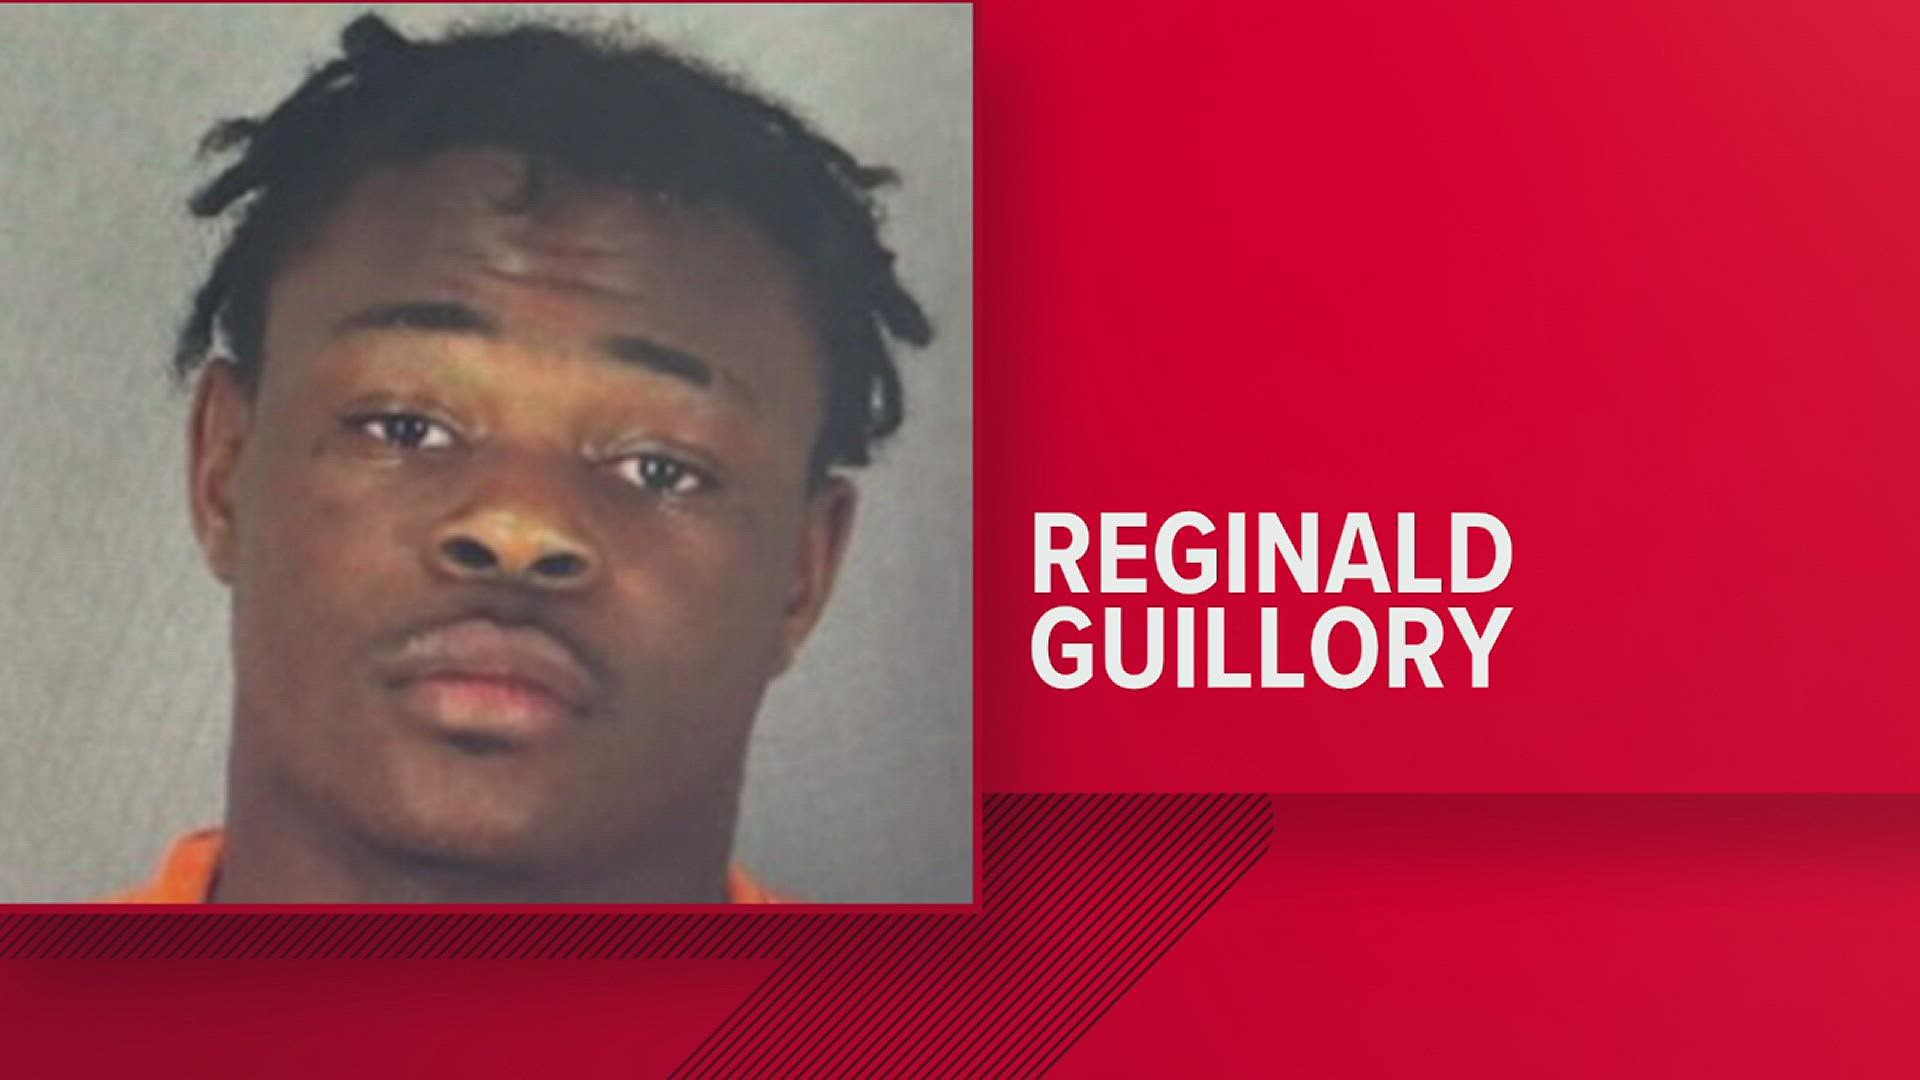 Anyone who knows where Reginald Guillory might be is asked to call Beaumont Police at 409-832-1234.